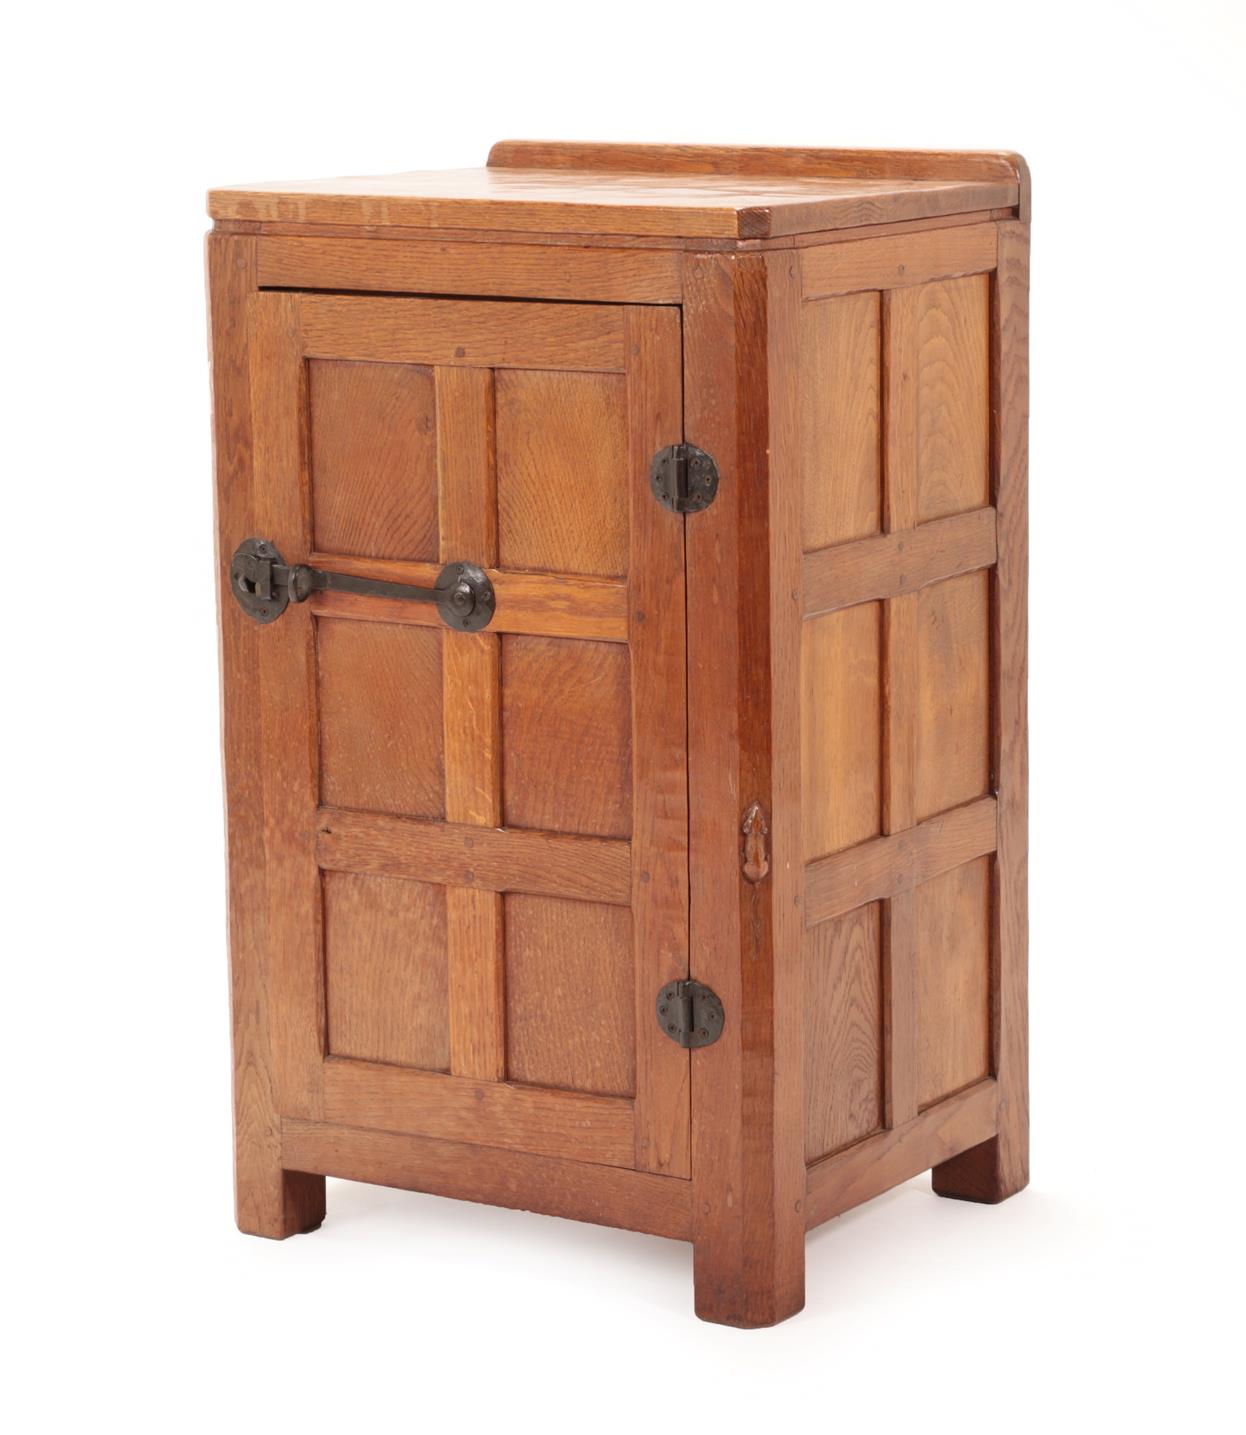 Lot 2041 - Robert Mouseman Thompson (1876-1955): An English Oak Panelled Bedside Cupboard, 1930's, with raised